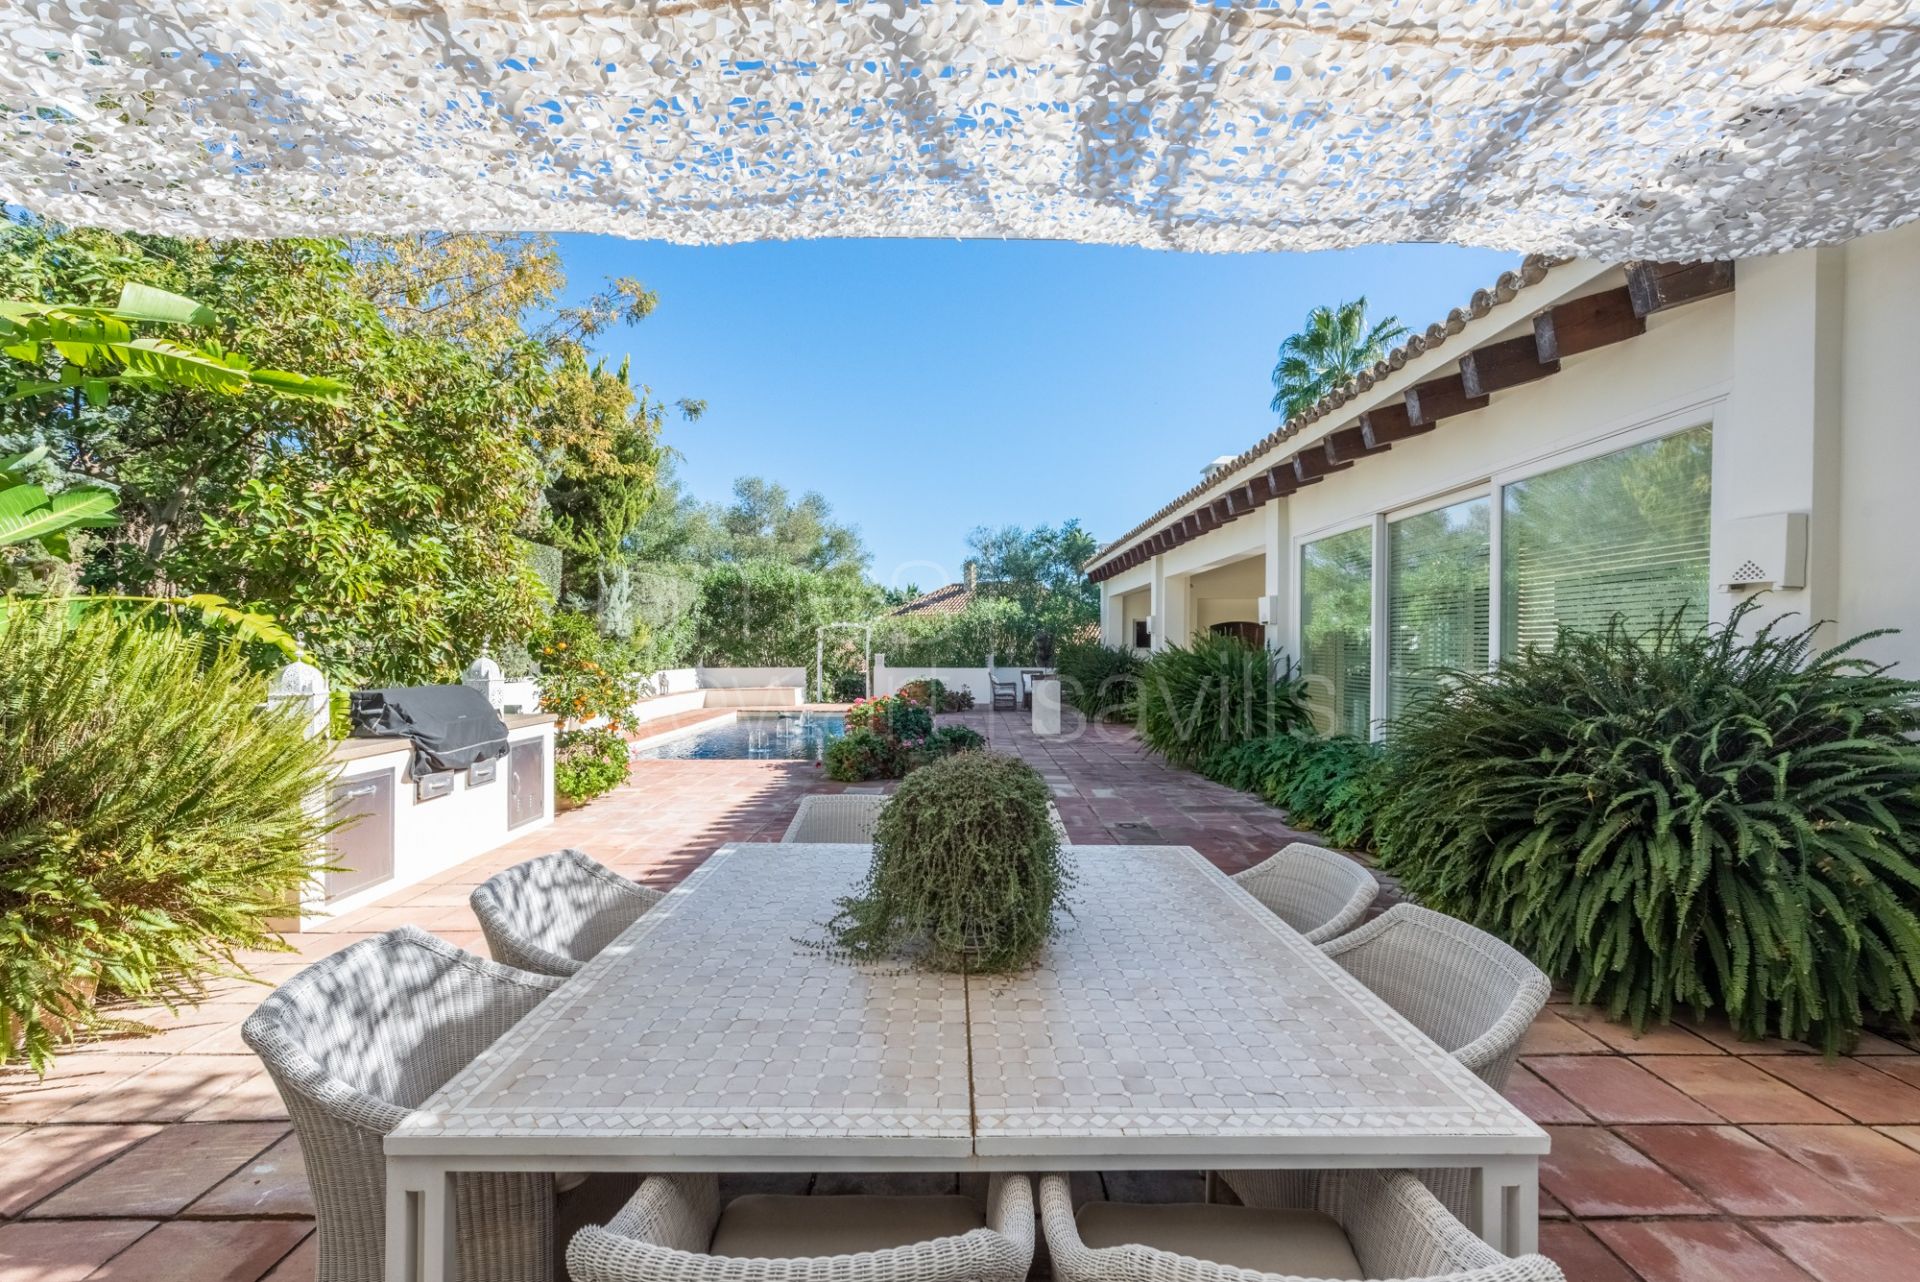 A very stylish house set in a beautiful garden in the Kings and Queens area of Sotogrande Costa